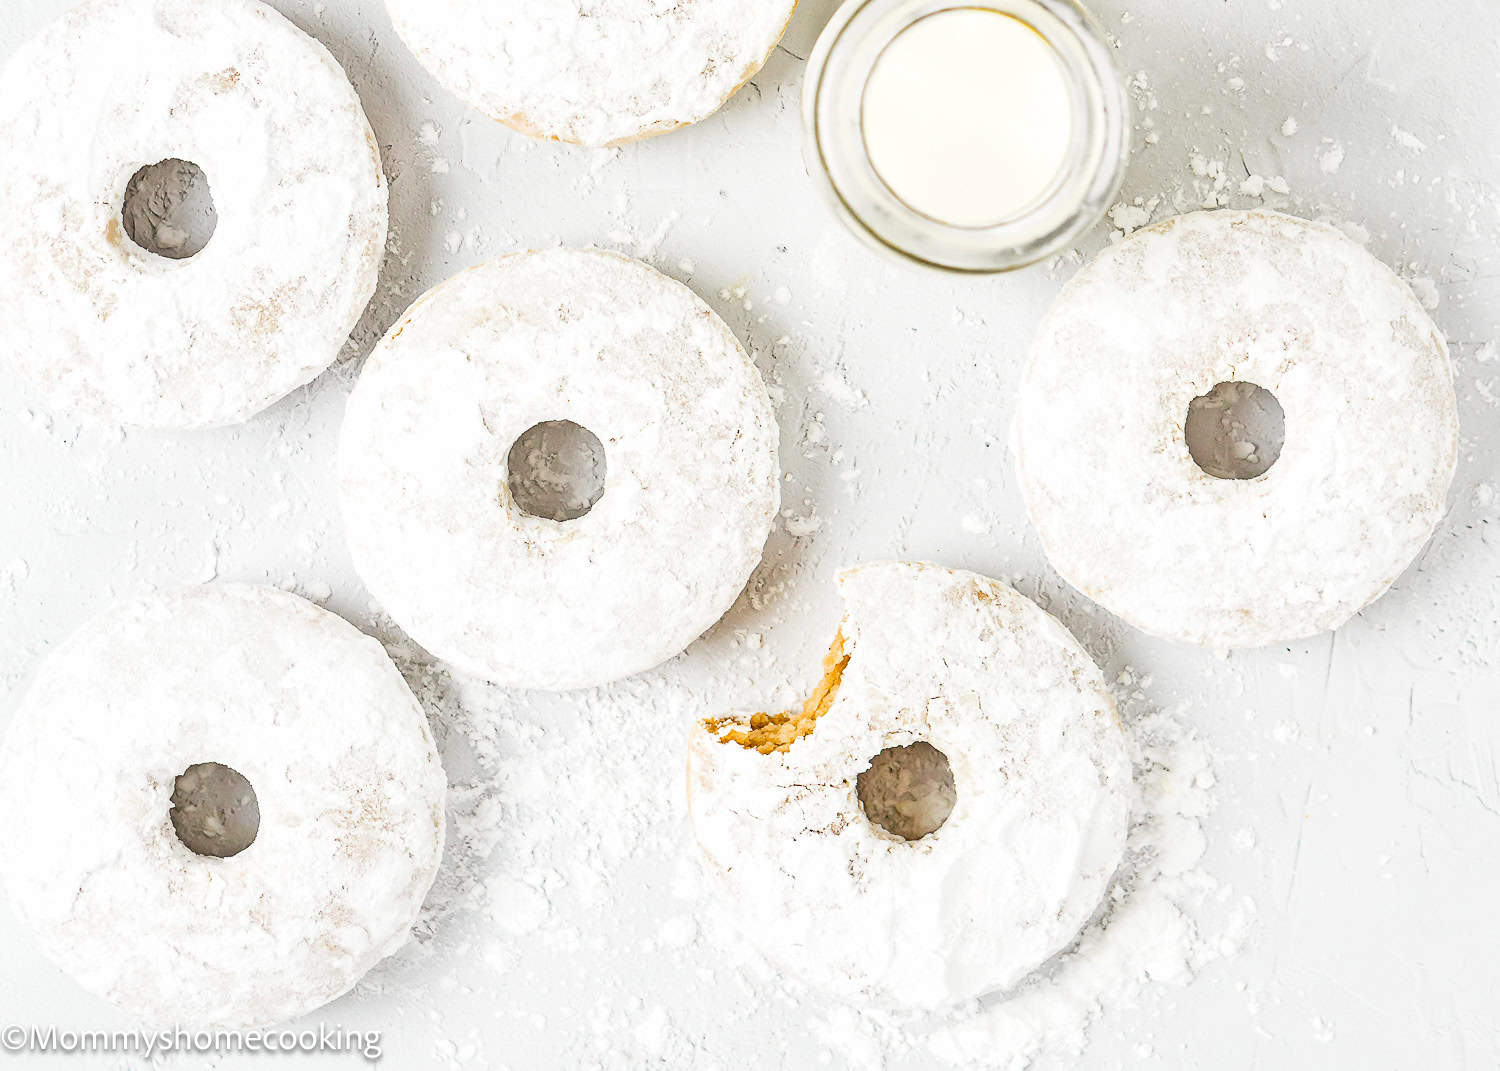 Egg-free Old Fashioned Powdered Sugar Donuts over a white surface.